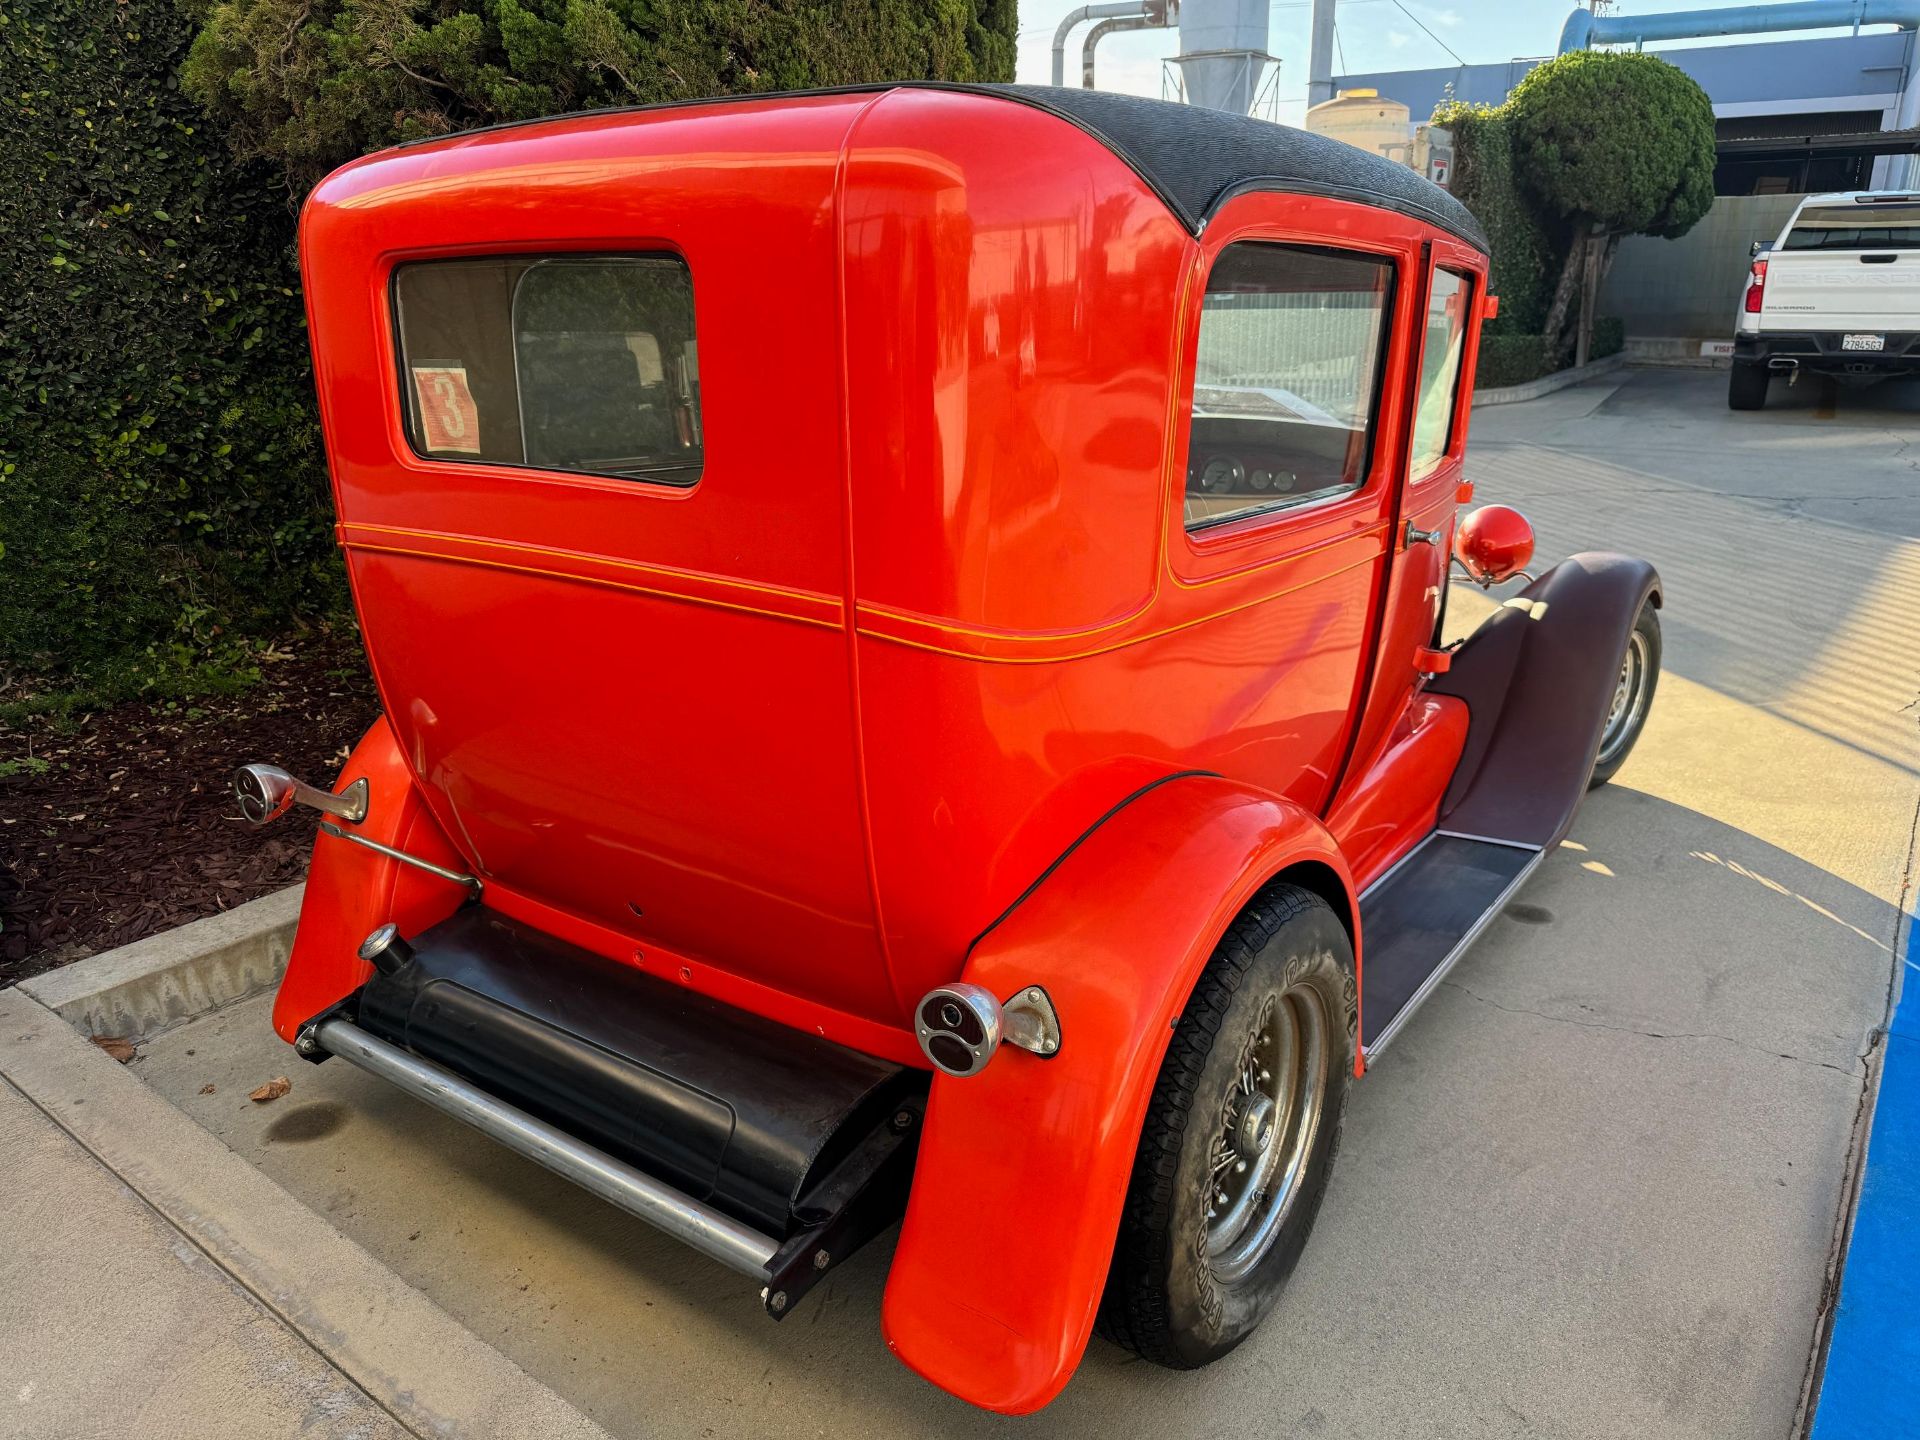 1928 FORD HOT ROD COUPE, (LOCATION: SANTA FE SPRINGS, CA) - Image 4 of 11